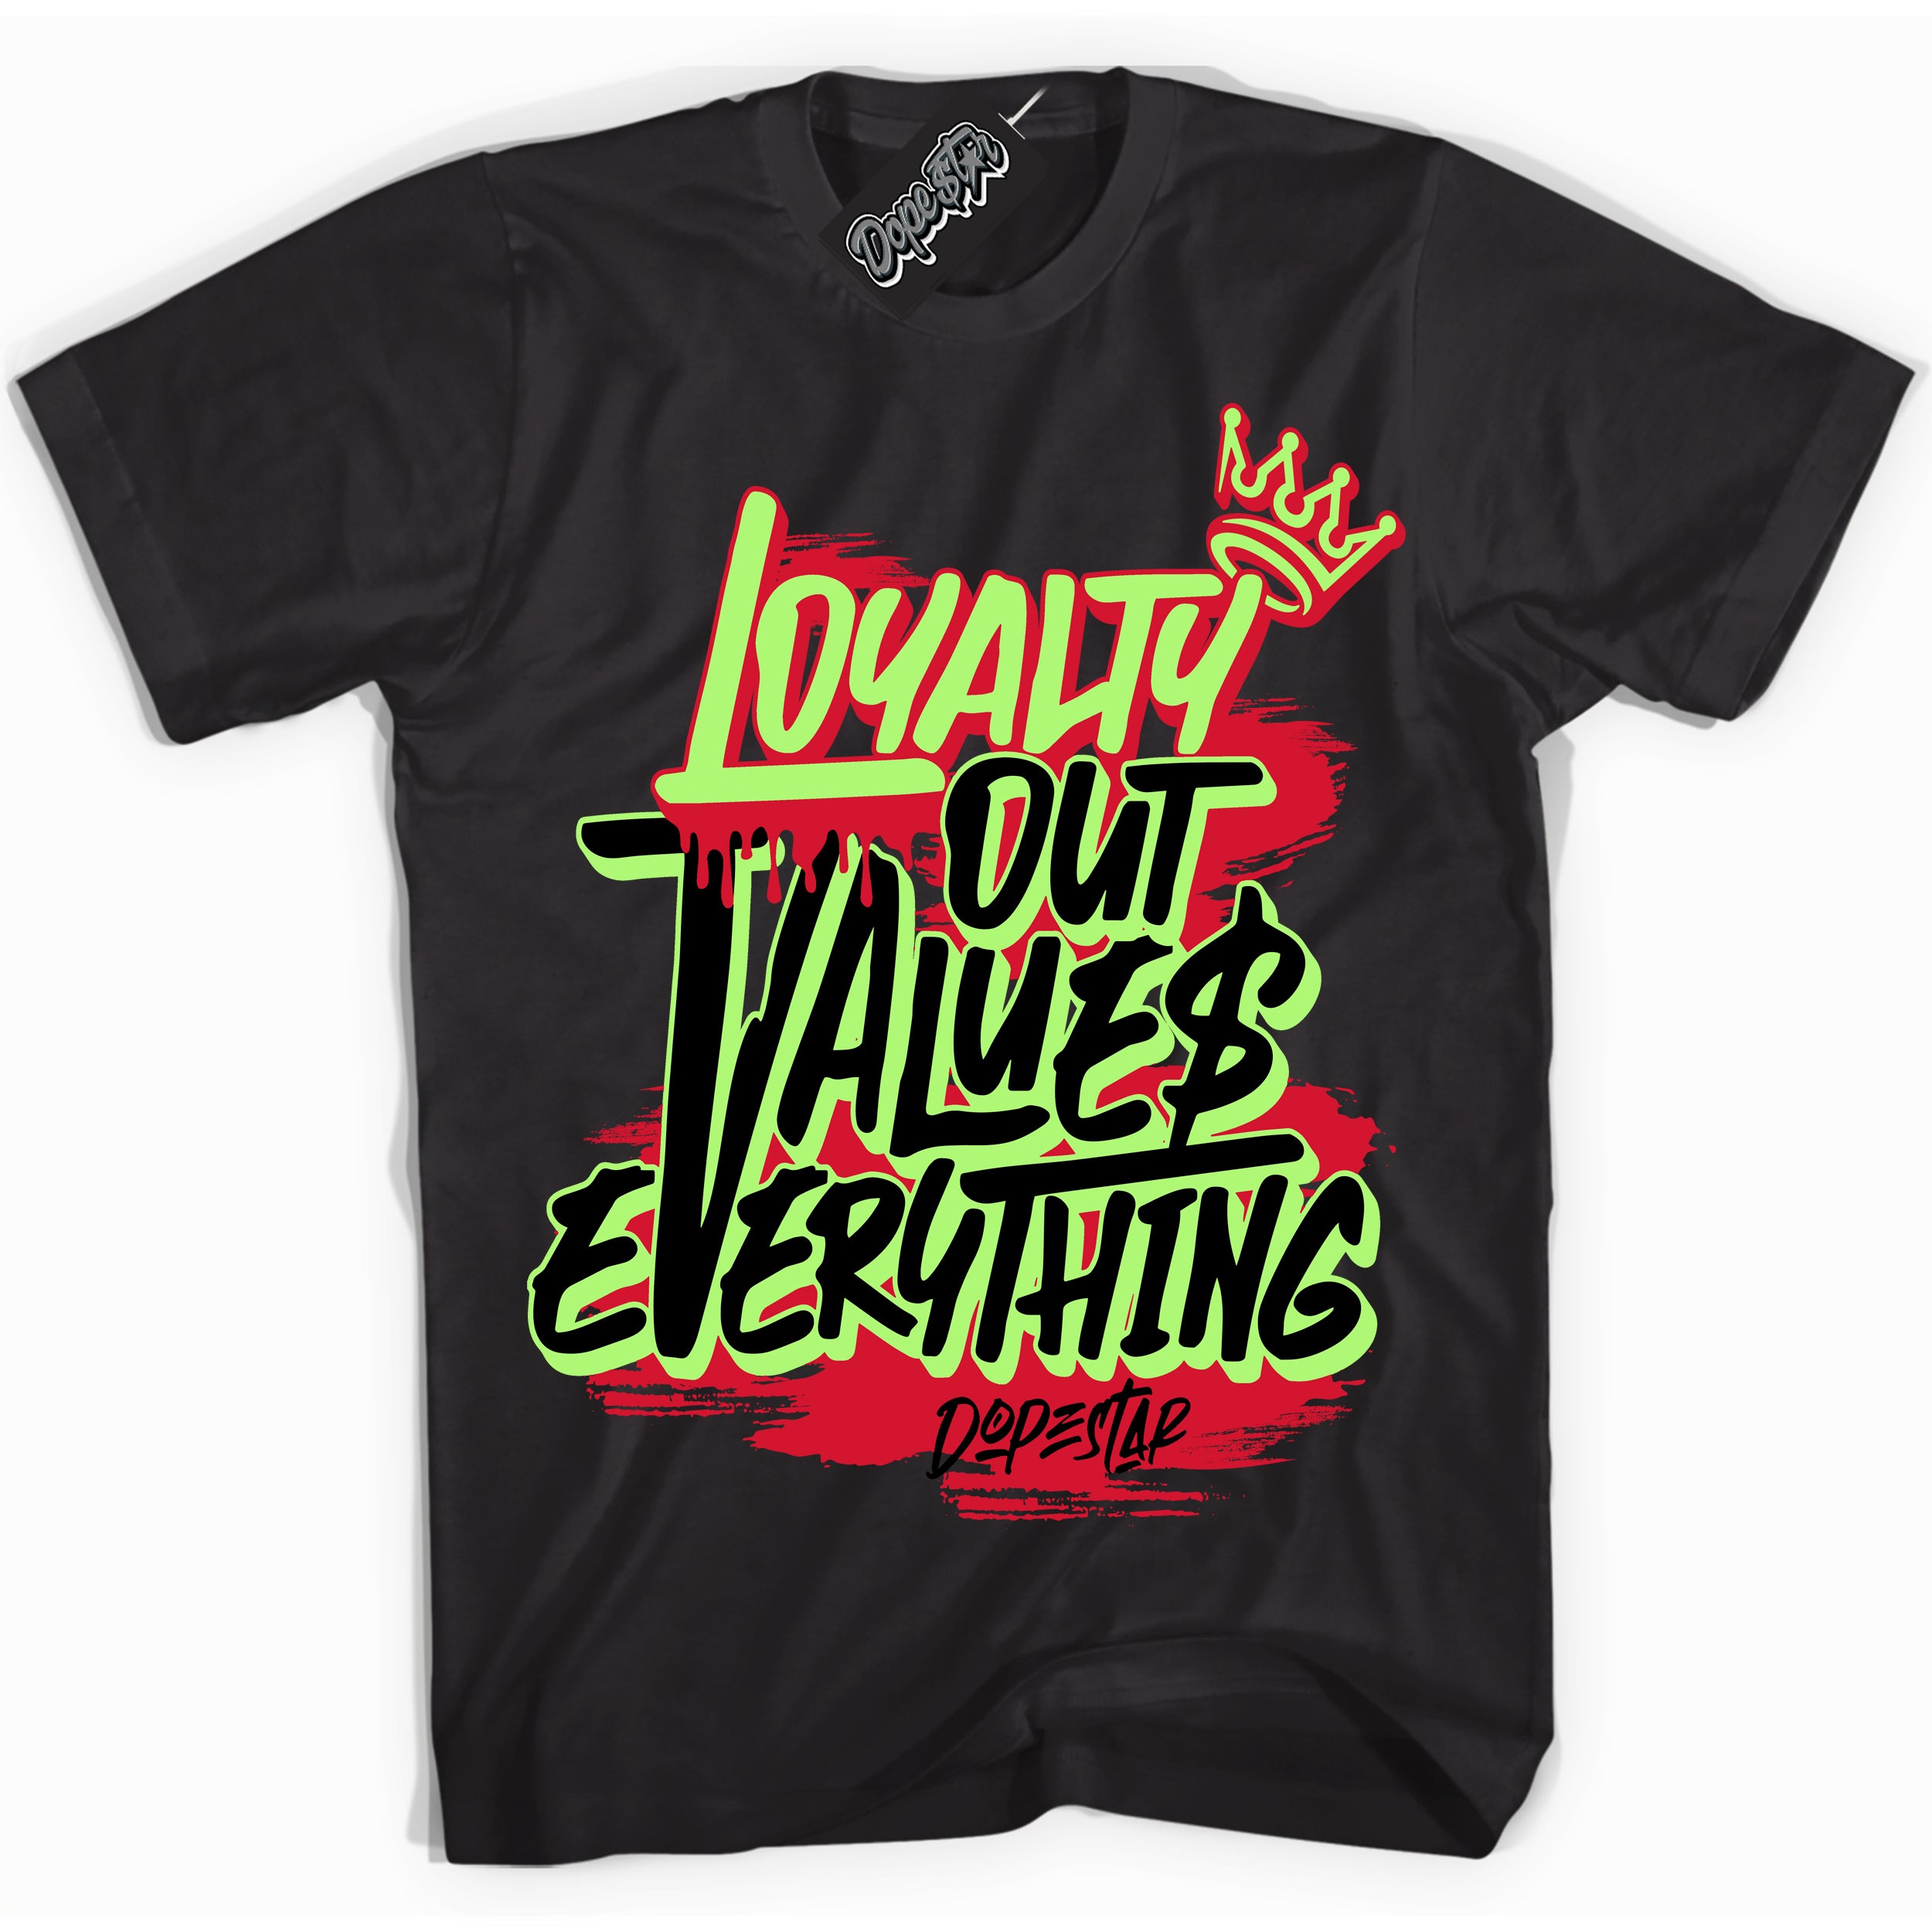 Cool Black Shirt with “ Loyalty Out Values Everything” design that perfectly matches Reverse Grinch 6s Sneakers.